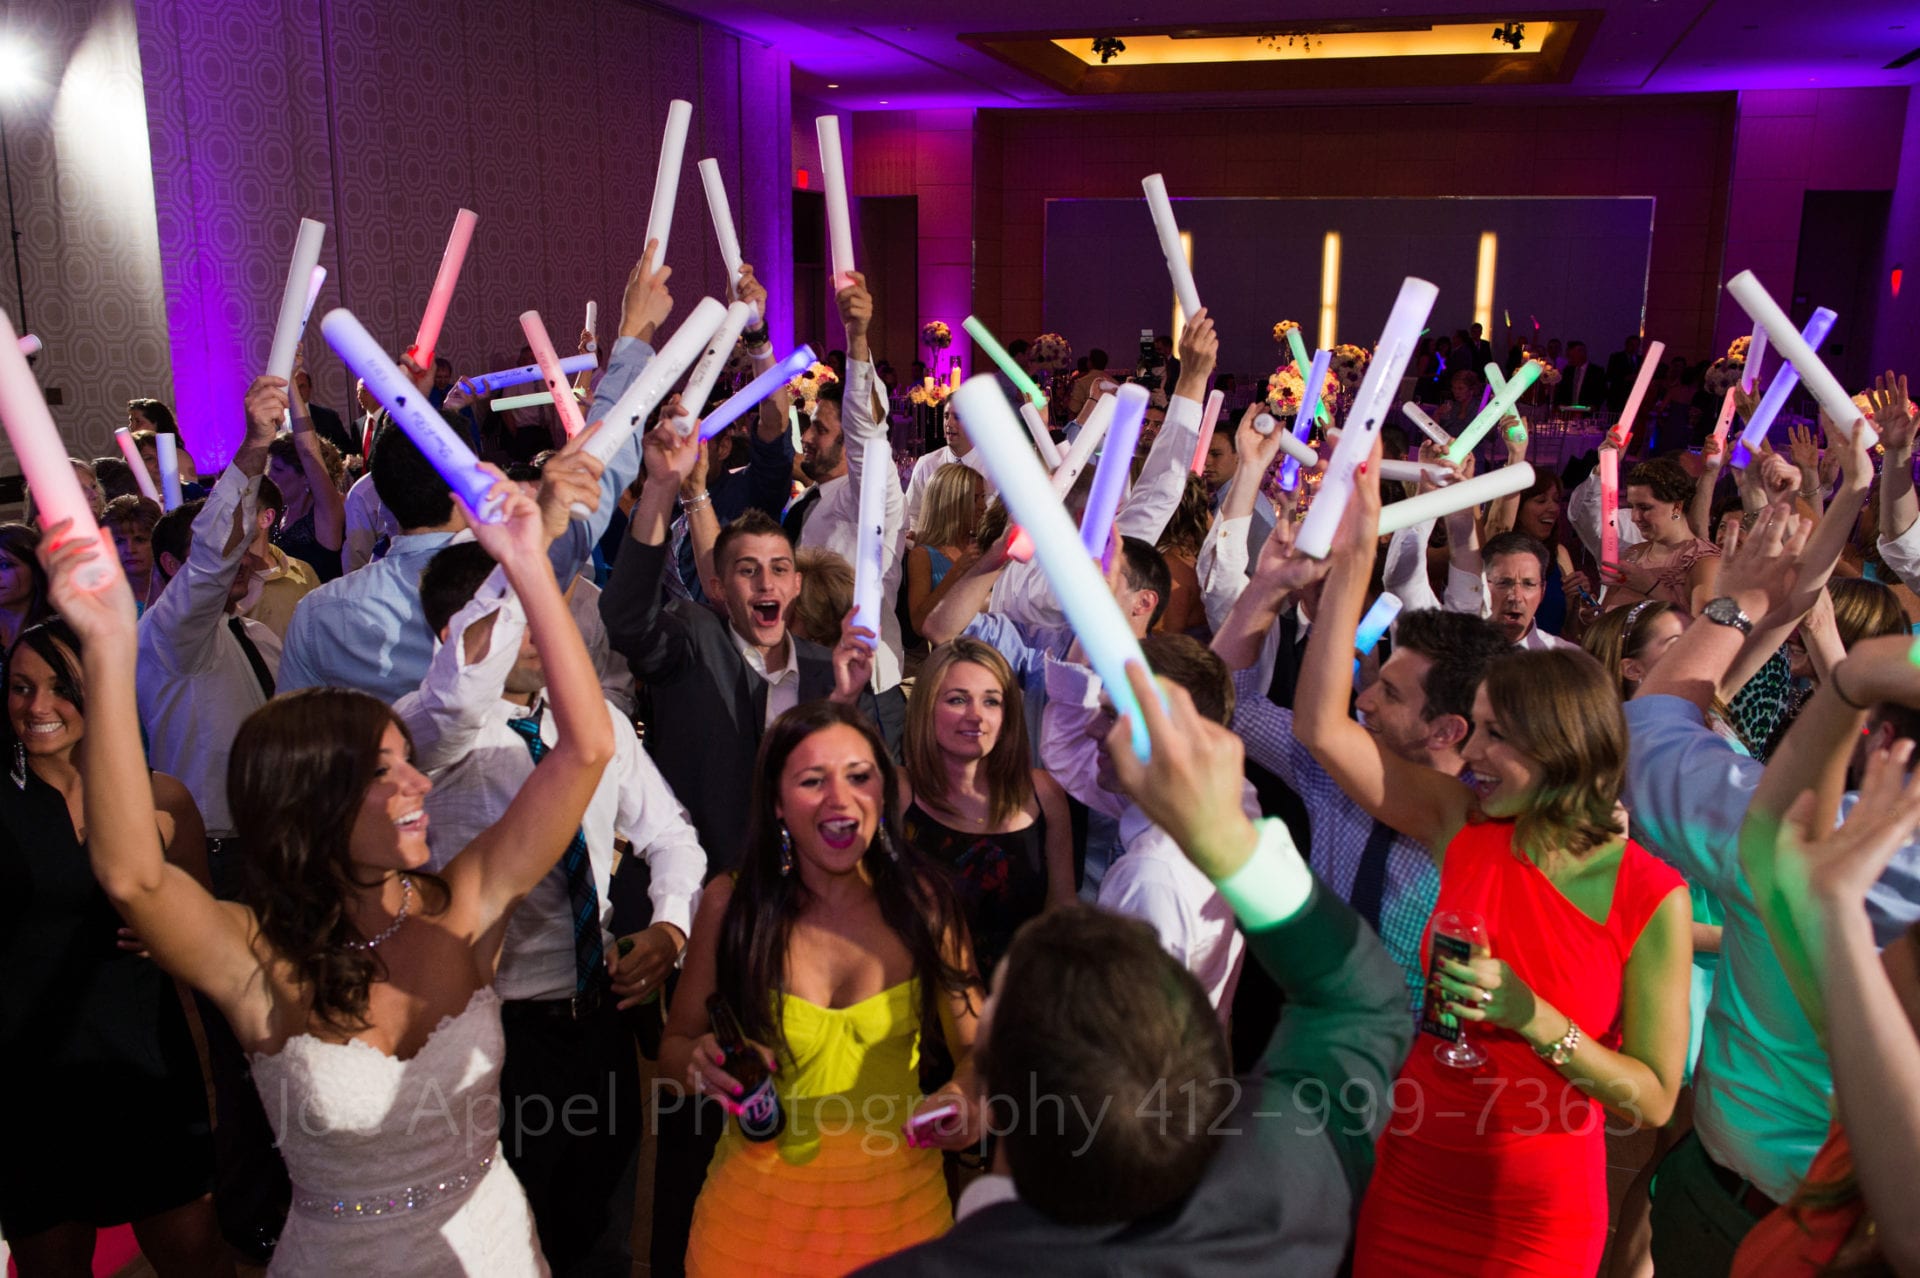 Fairmont Hotel Pittsburgh Weddings A crowded dance floor filled with guests who are waving lighted foam tubes in the air.